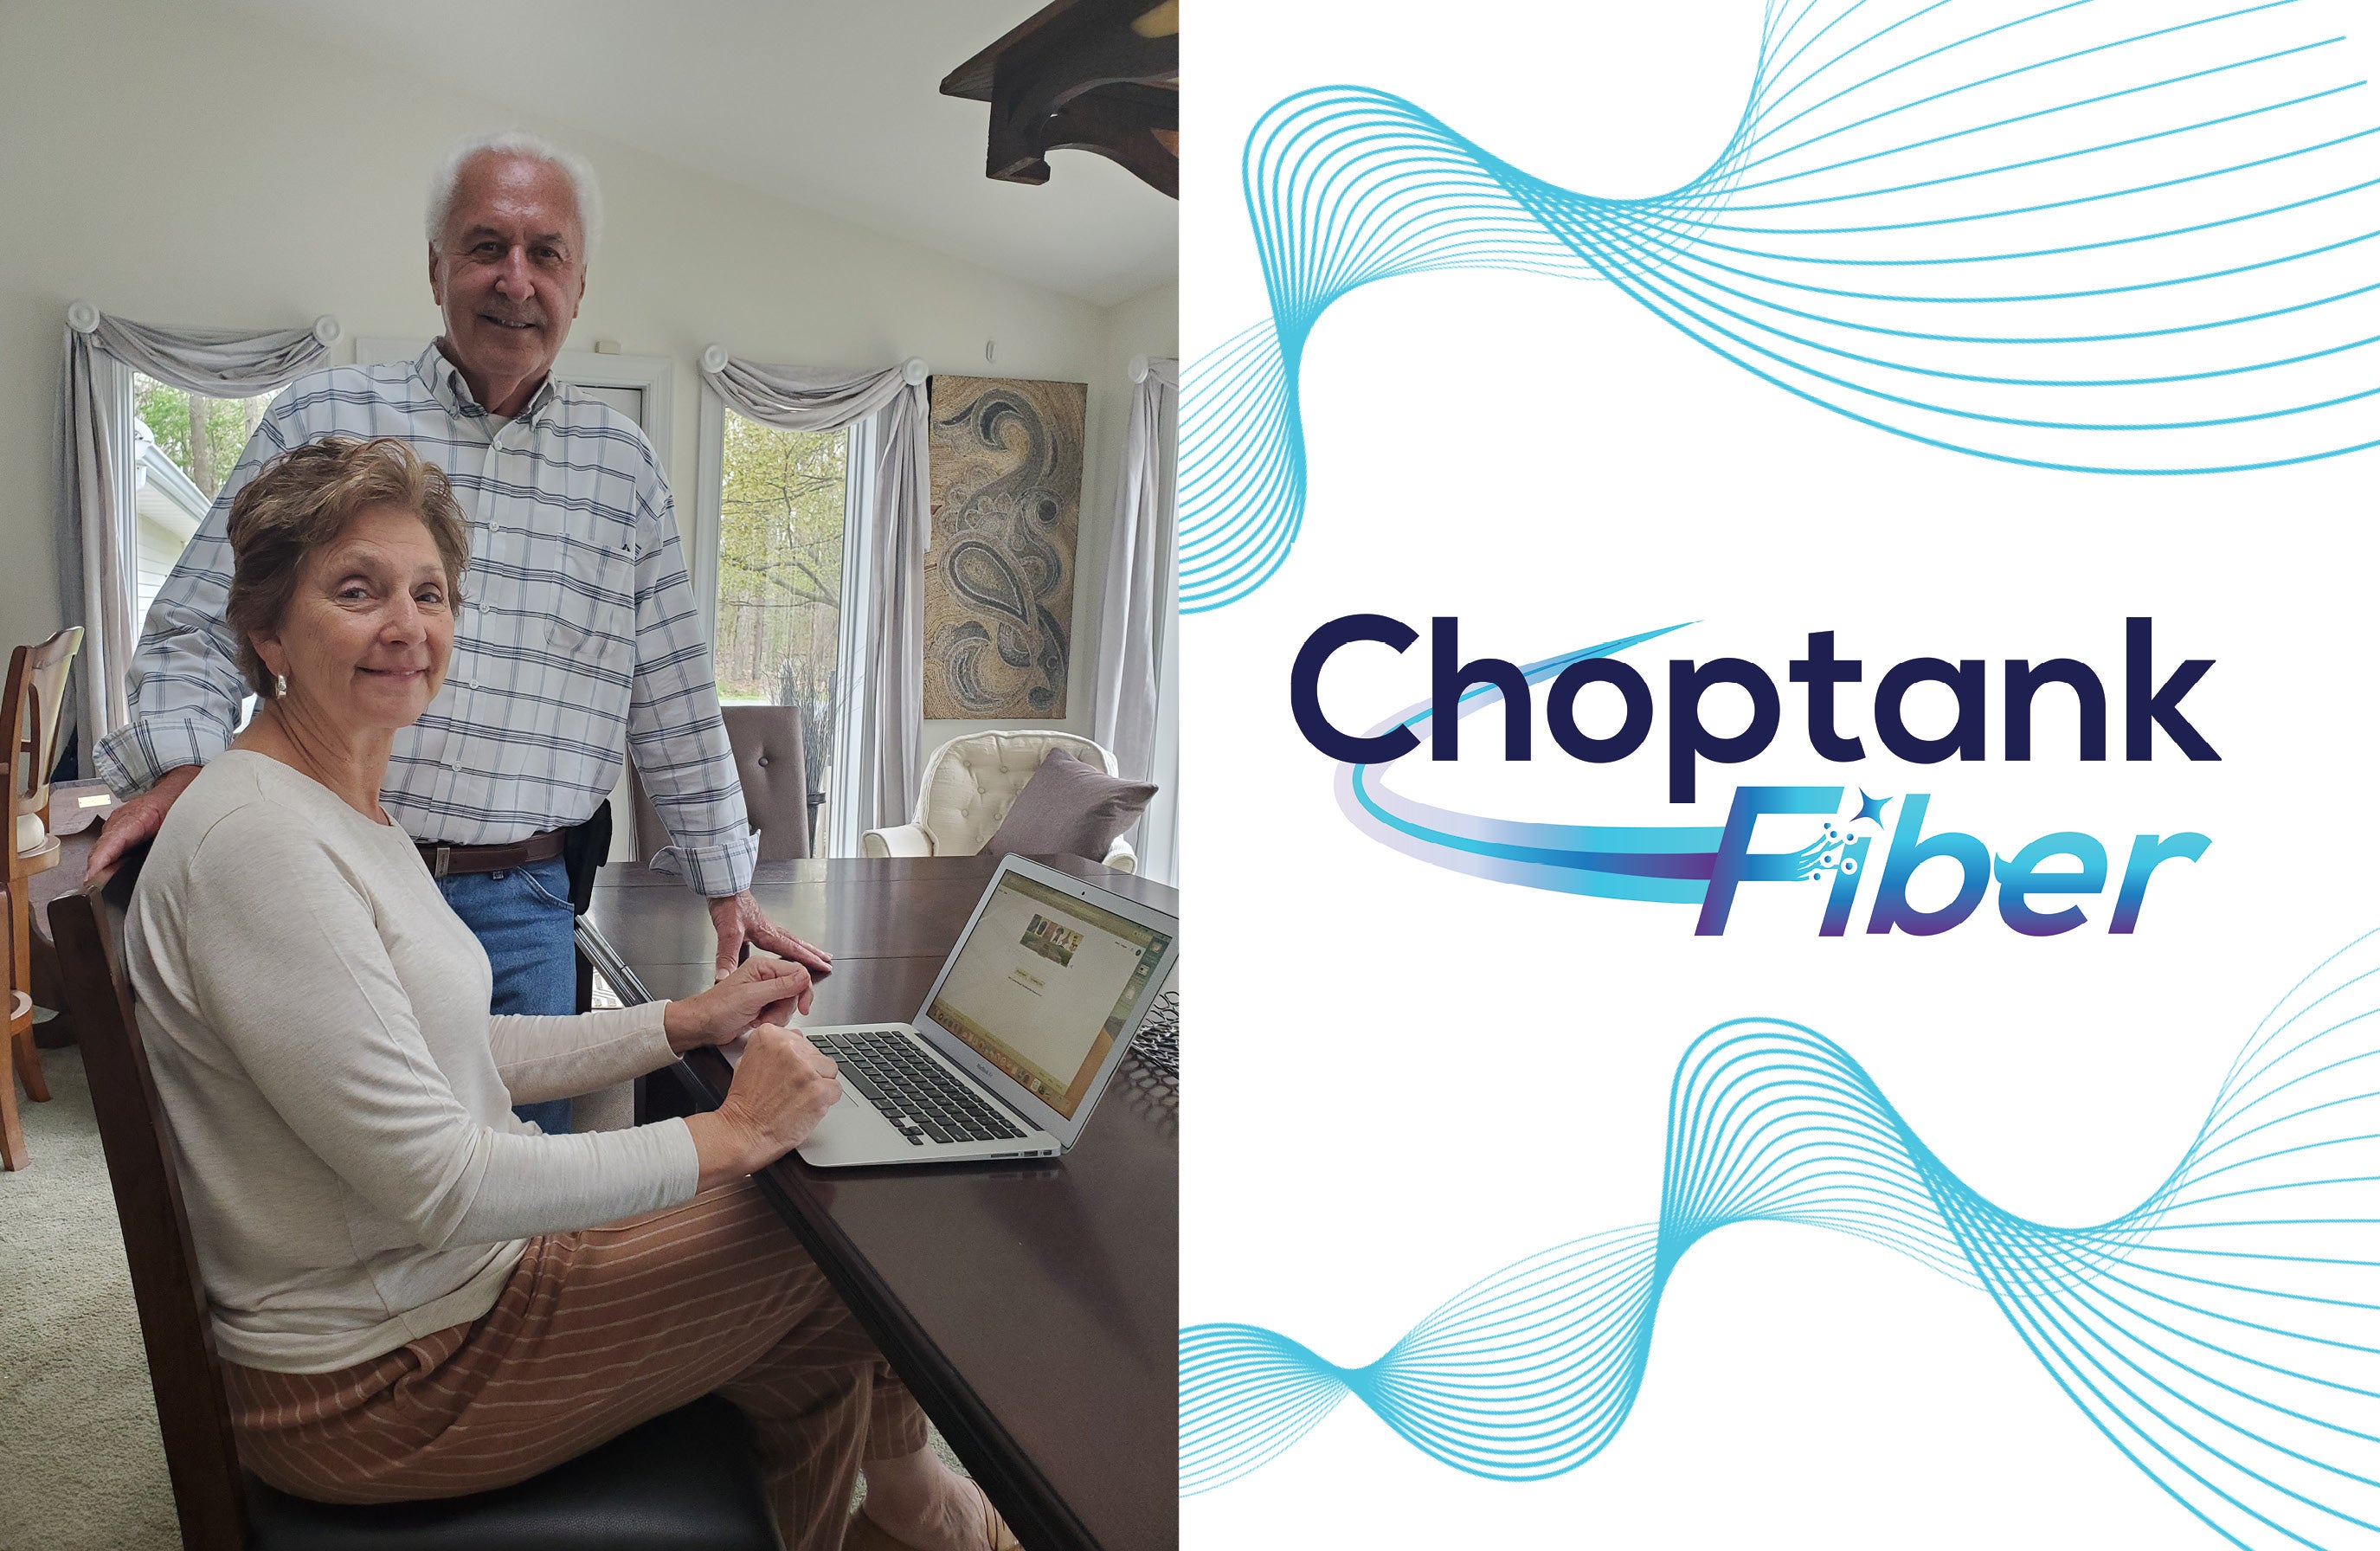 Choptank Fiber’s first official customers are Gordon and Sherry Hollingsworth of Caroline County.